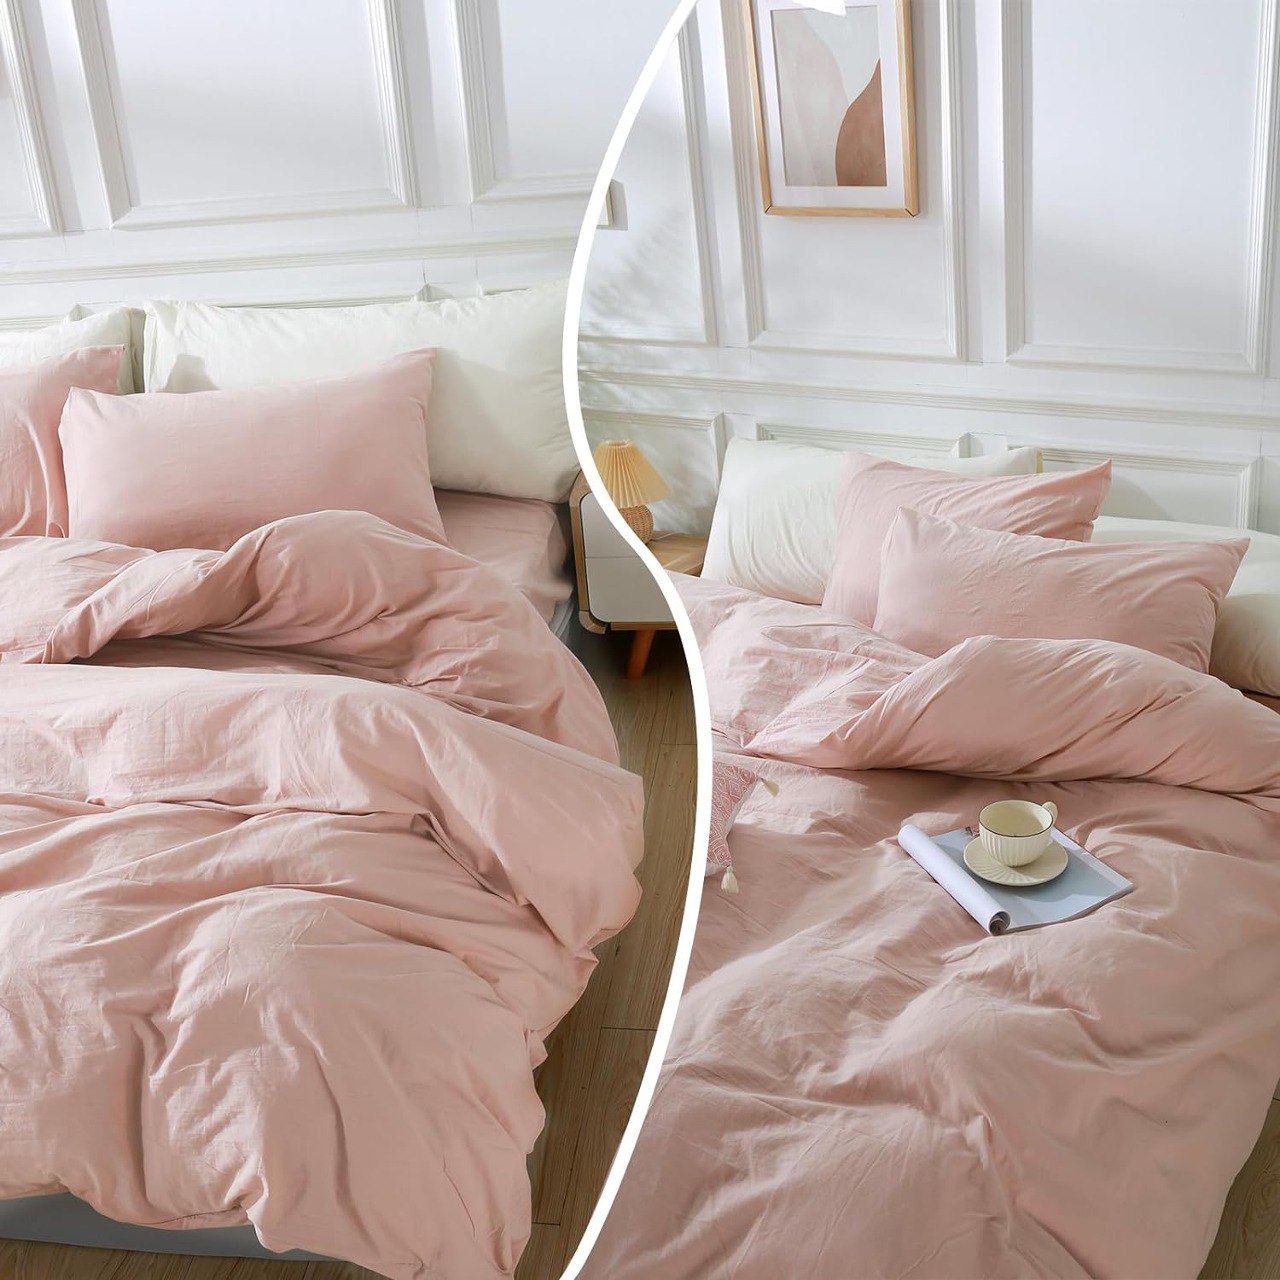 Housse Couette Rose + Taies d'oreillers Offerts  -Doux & Antiallergique -